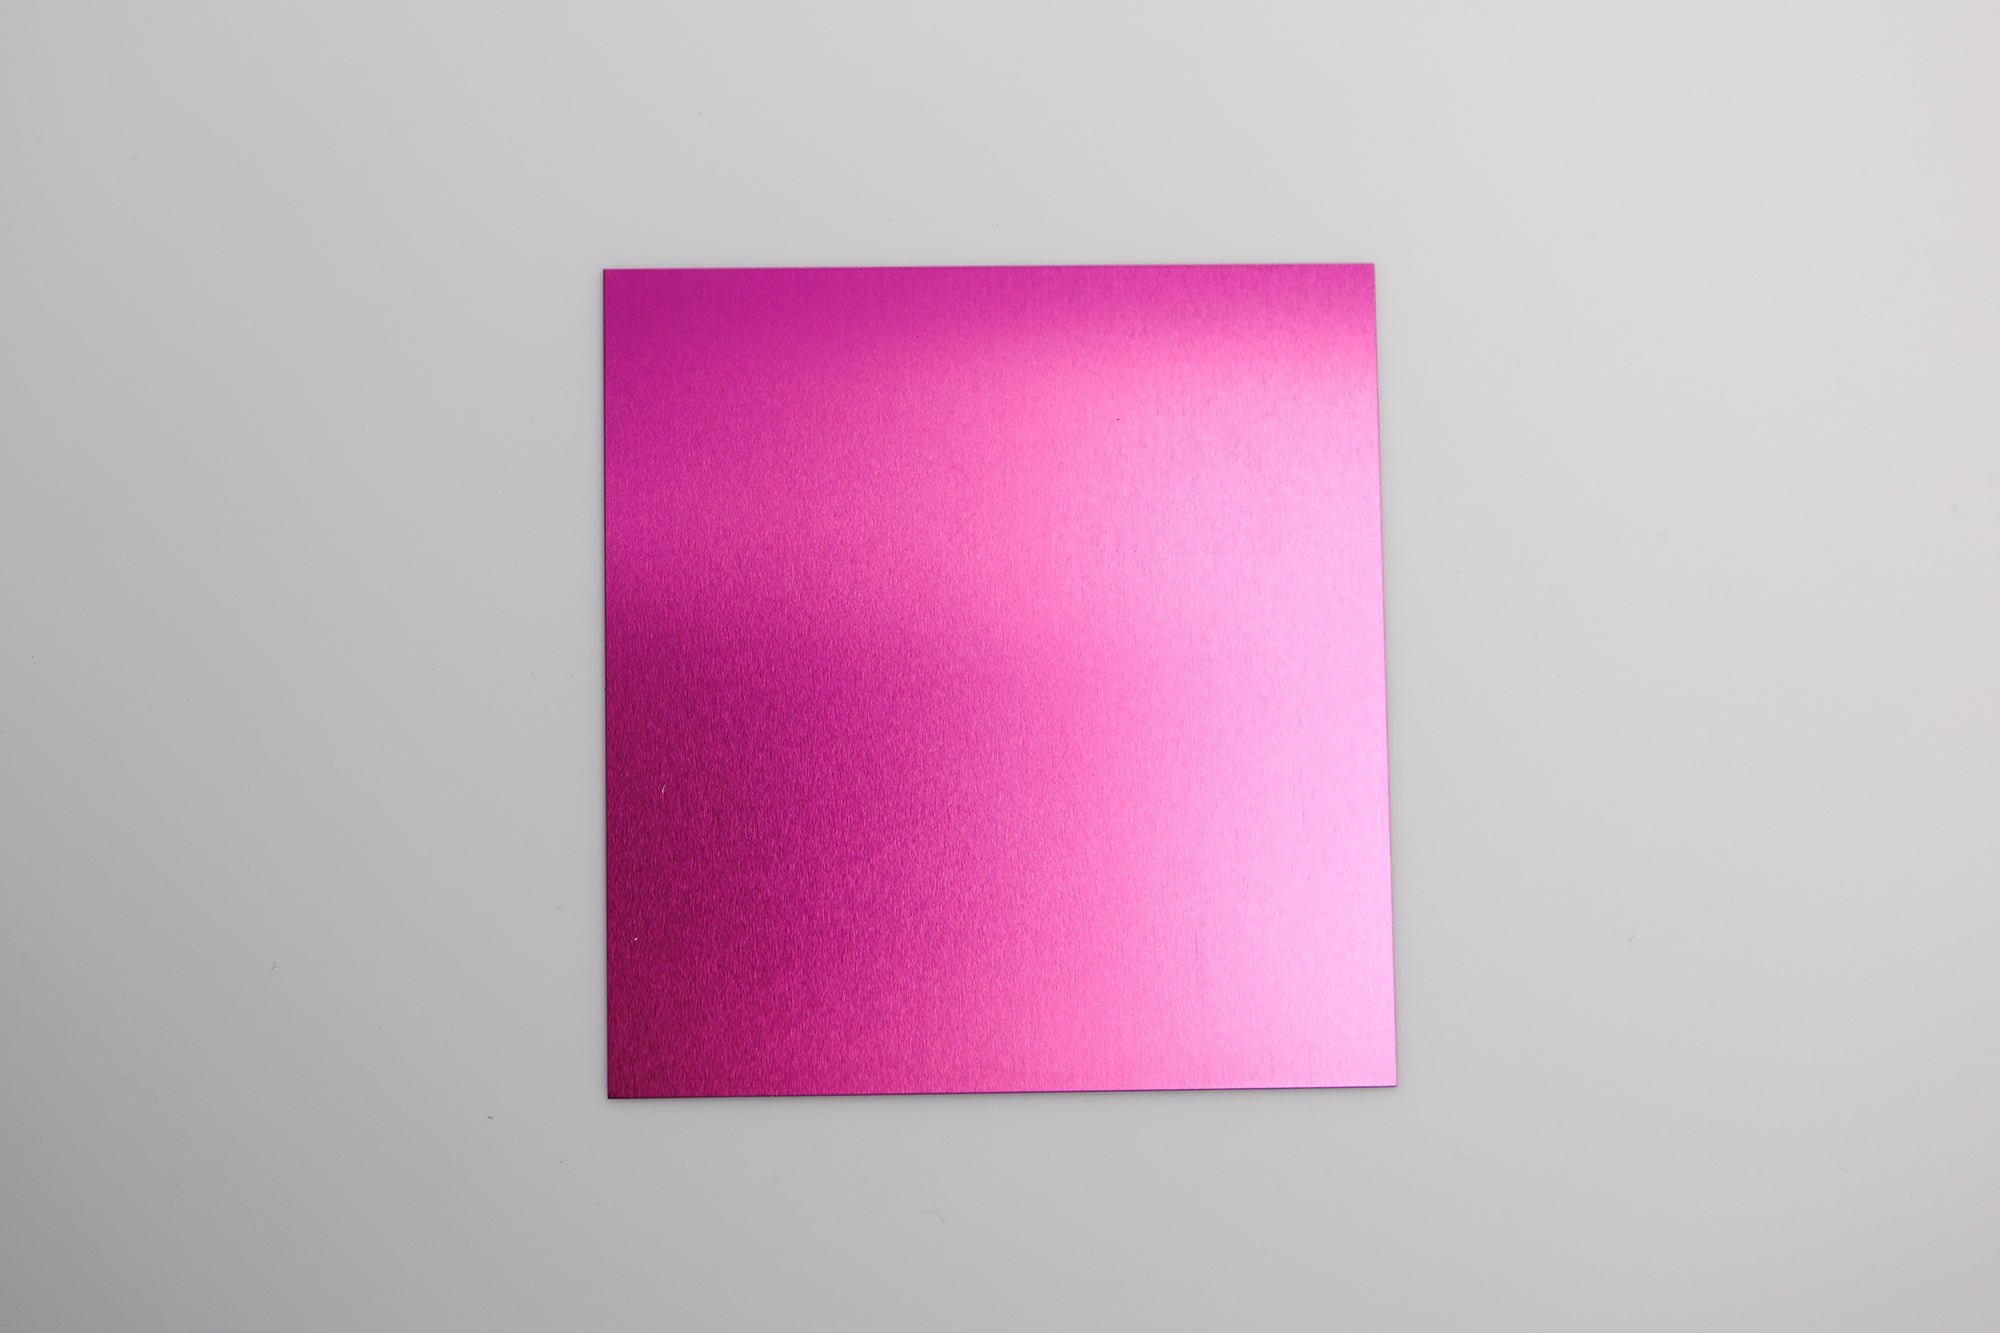 Indoor Anodised Aluminium Sheet Pink 570W x 390H x 0.5mm or 1mm Thickness